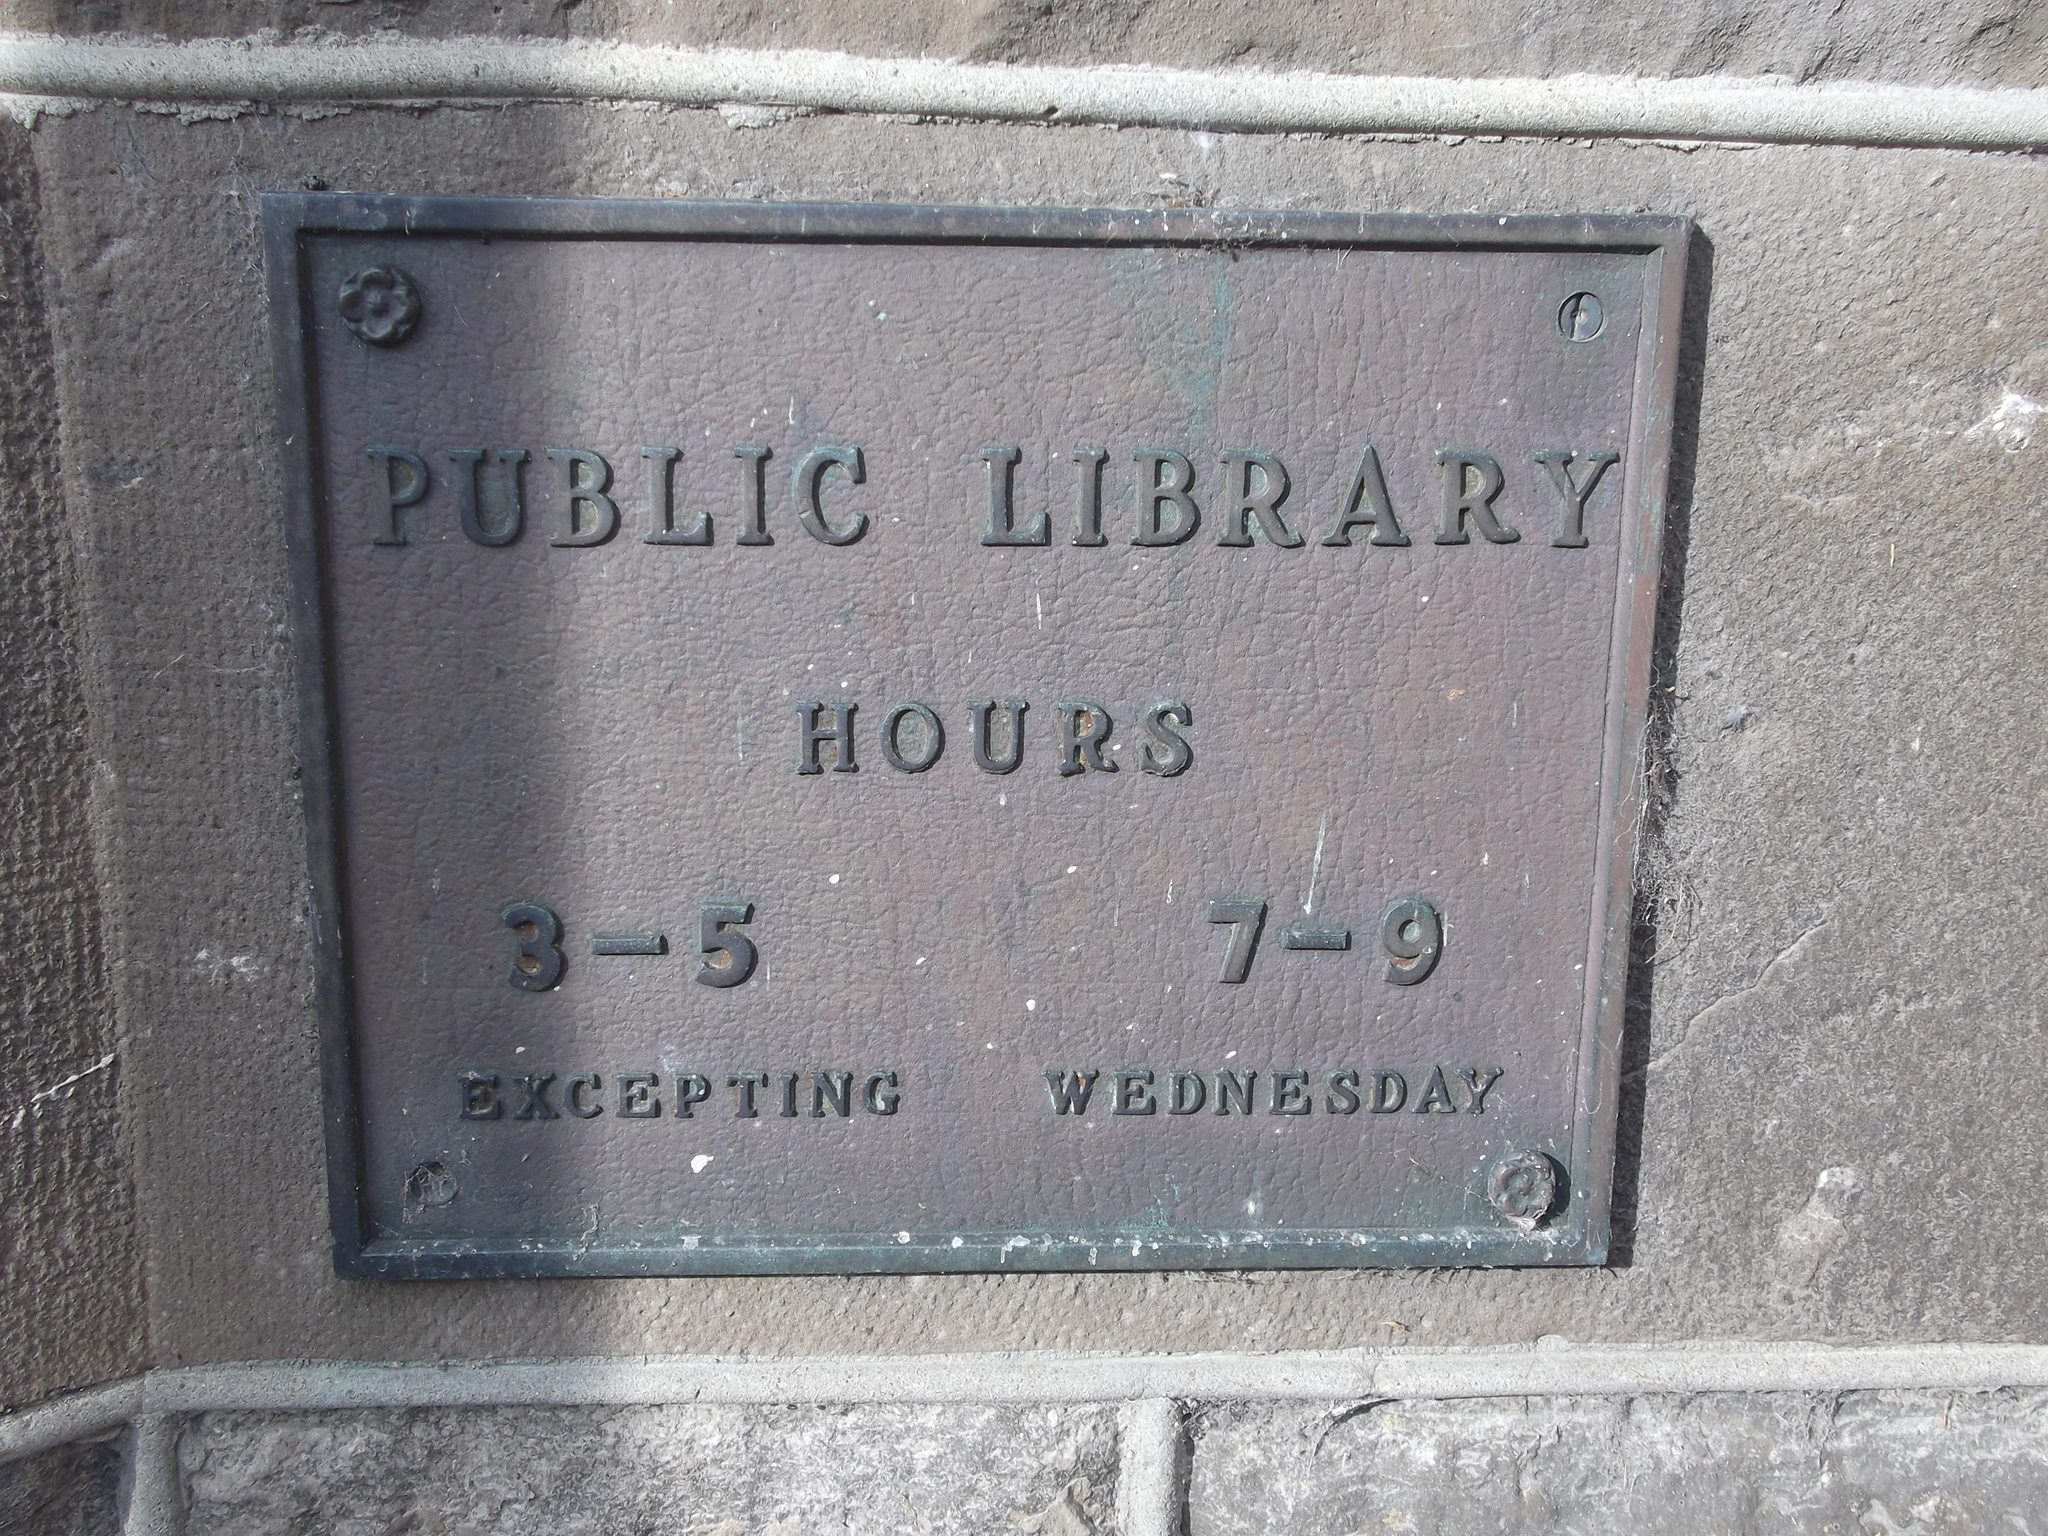 The Carleton Place Public Library operated out of the Town Hall from 1898 to 1970 when the present building was constructed.